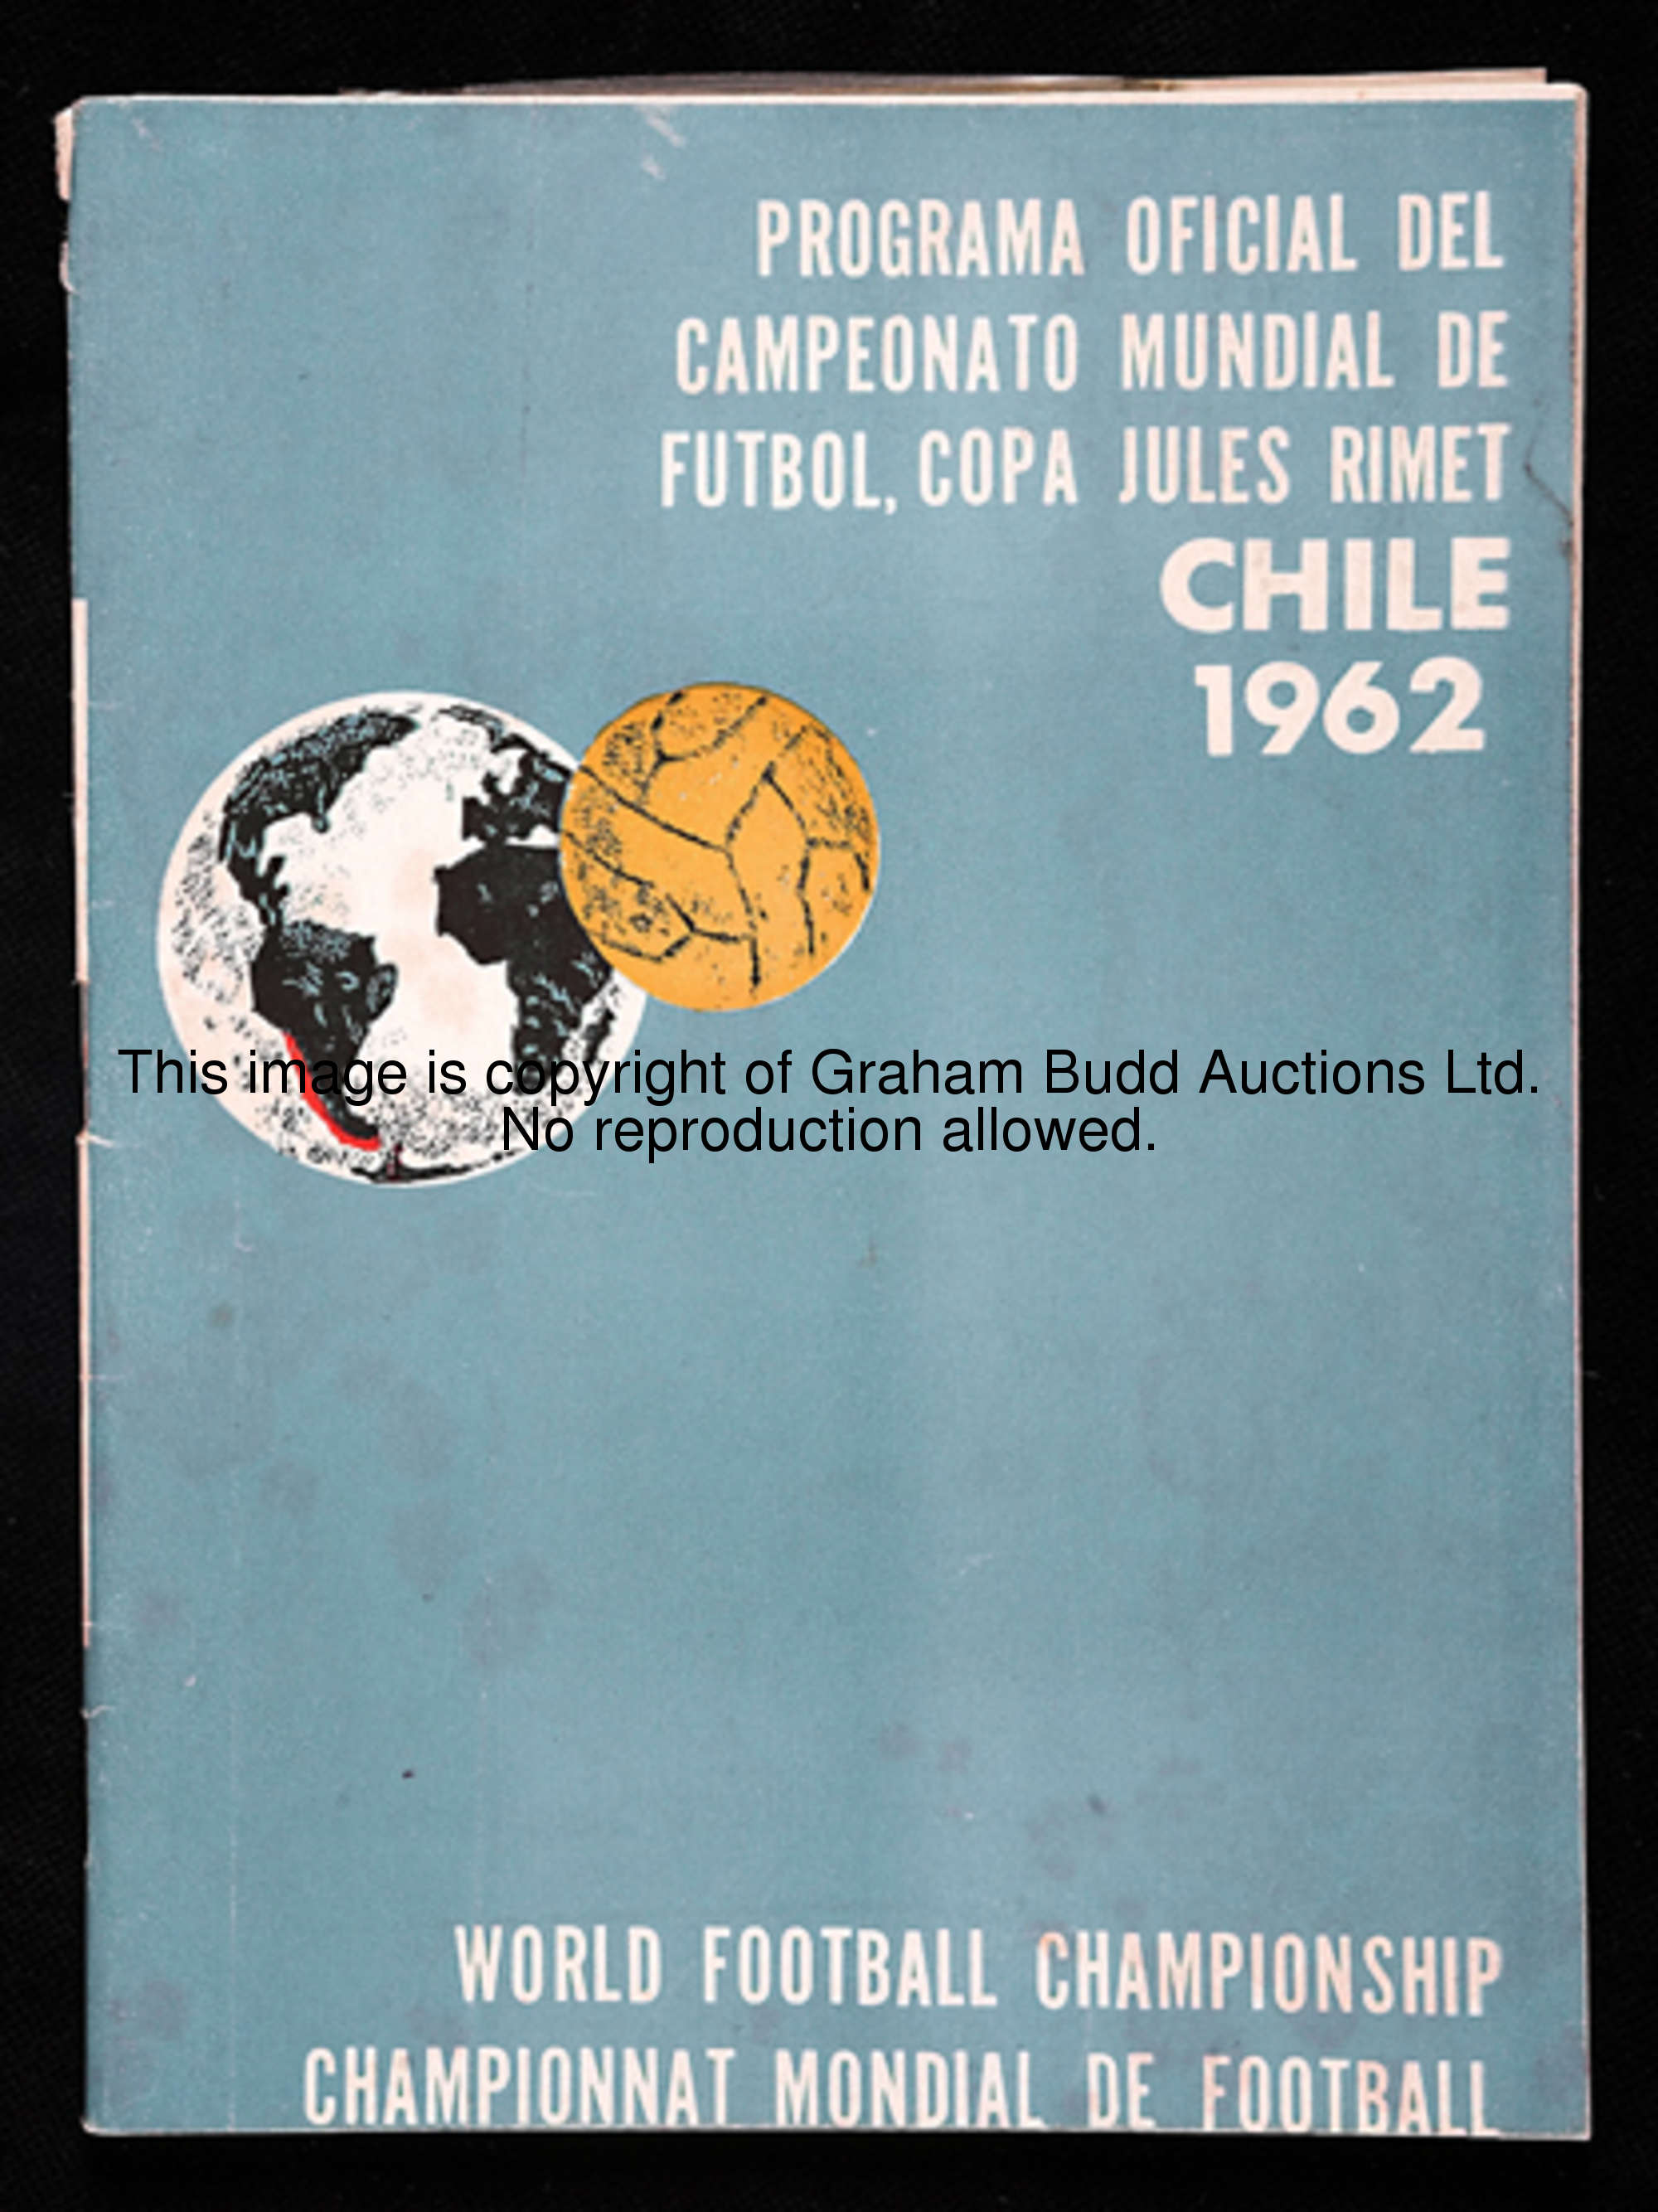 An official programme for the 1962 World Cup finals in Chile